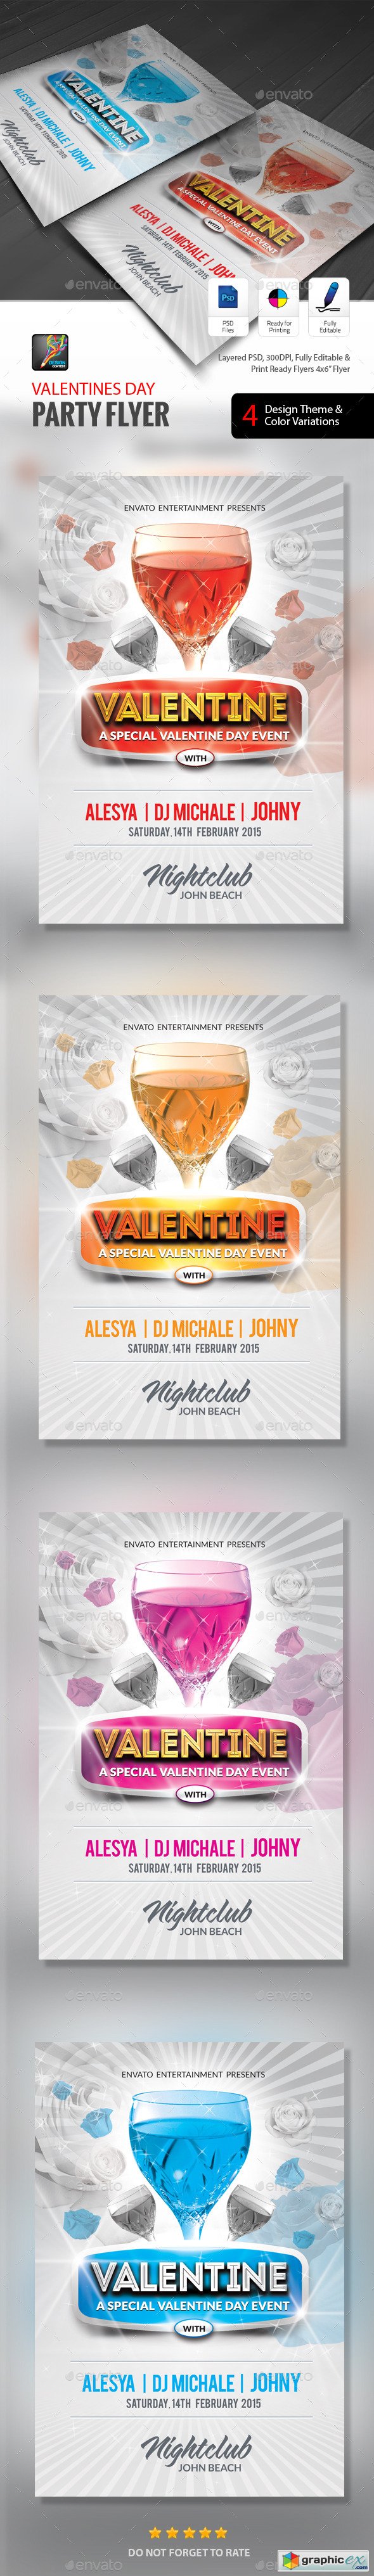 Valentines Day Party Flyer 9816474